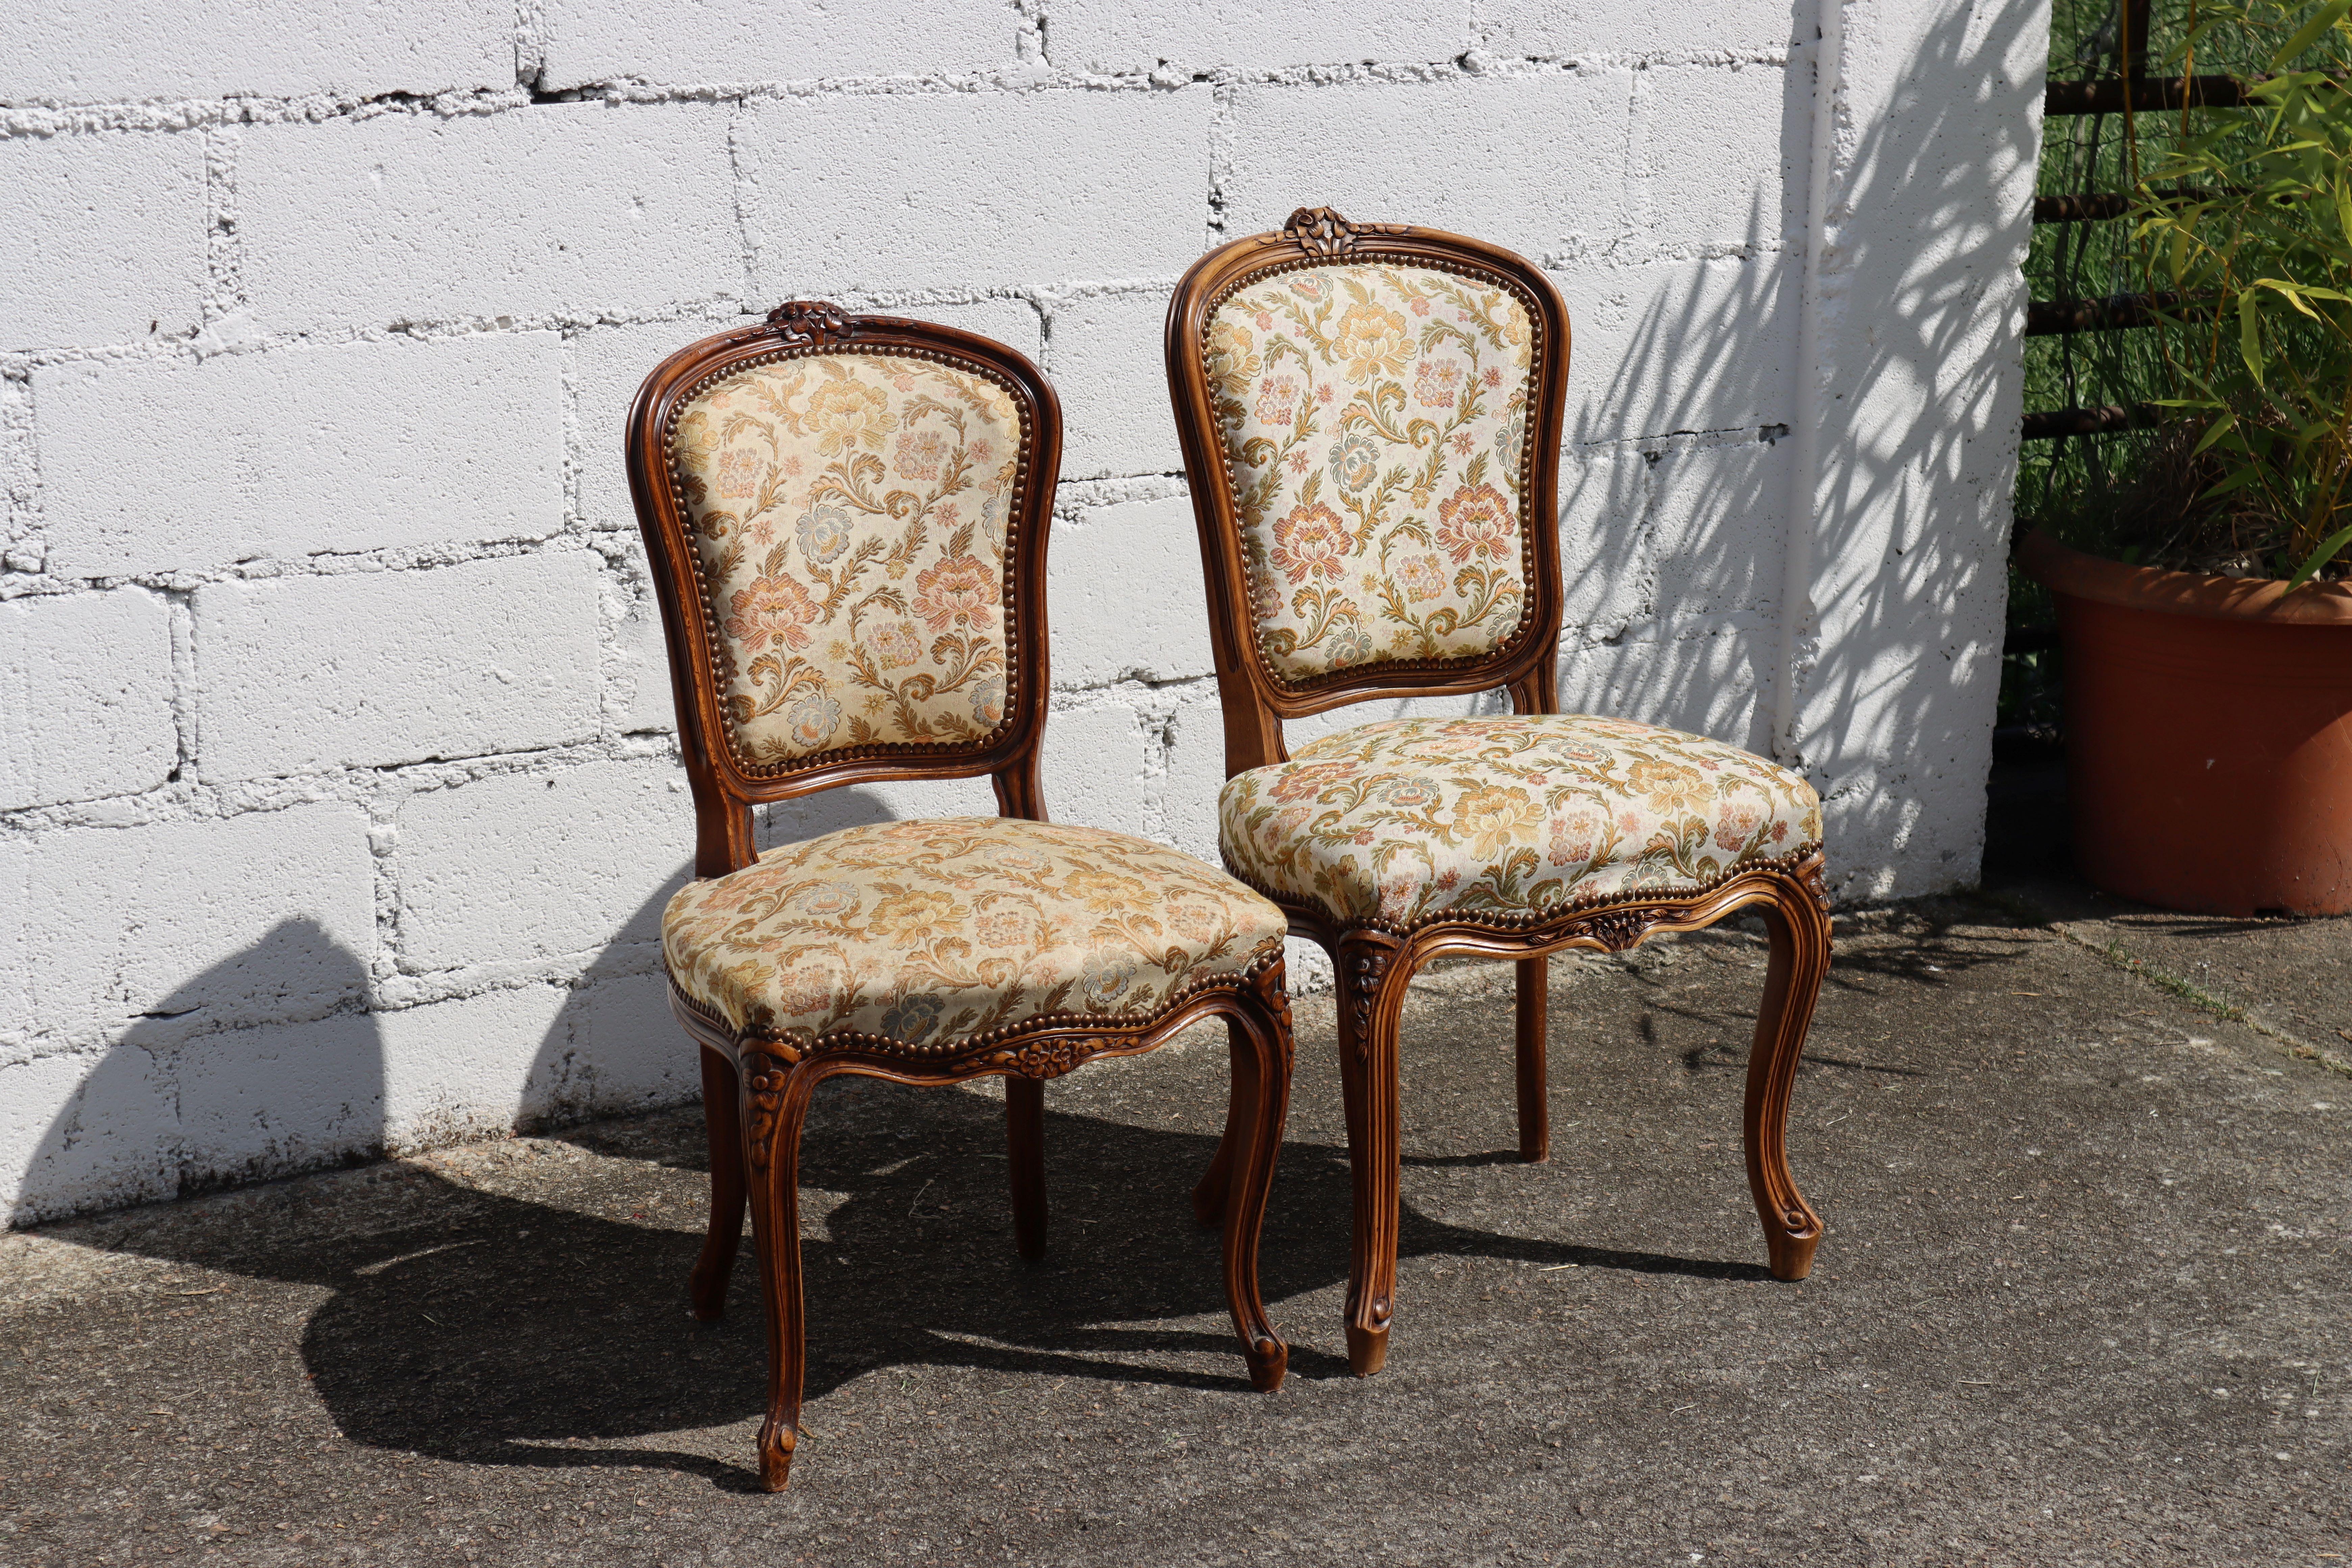 50s style dining chairs